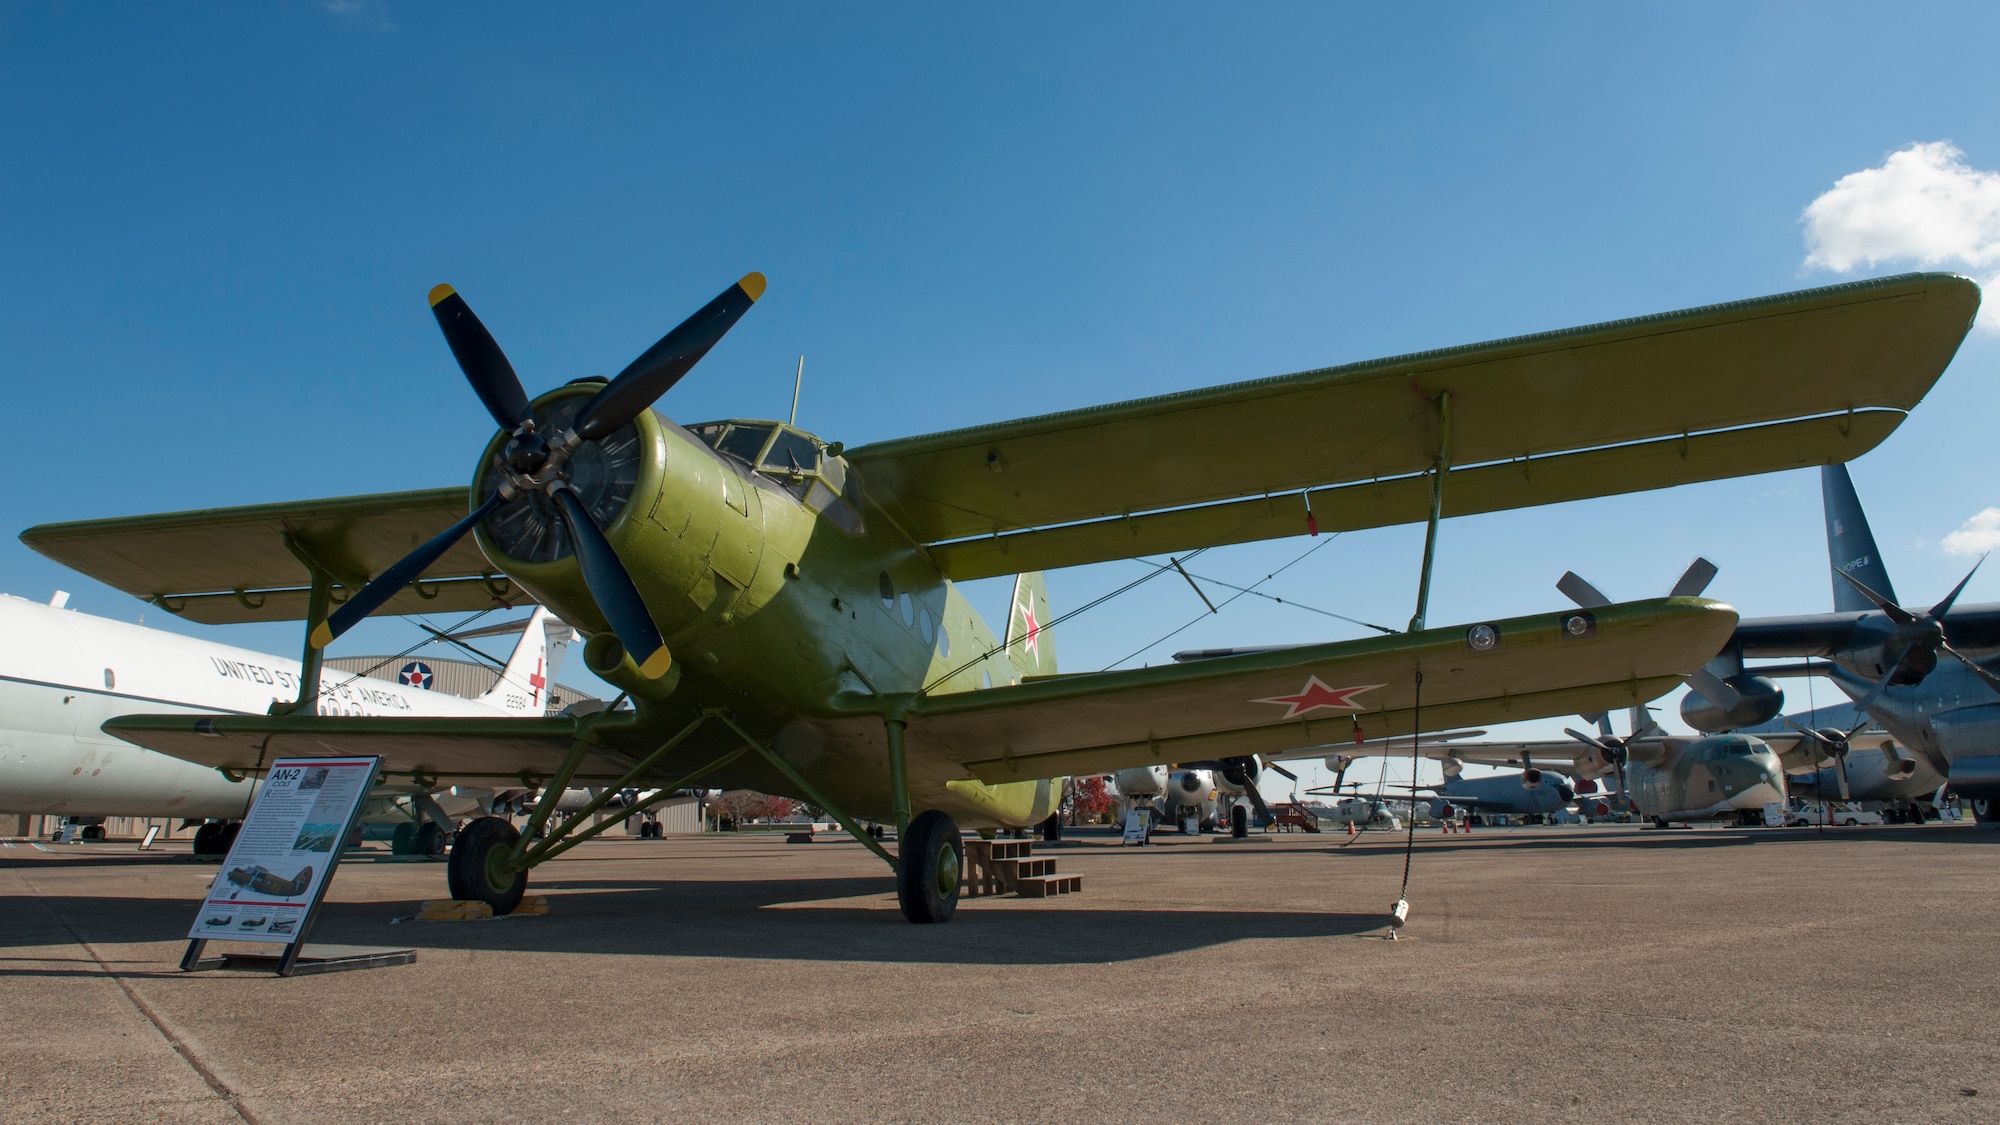 A Soviet-era Antonov AN-2 cargo aircraft sits on display Nov. 15, 2014, at the Air Mobility Command Museum on Dover Air Force Base, Del. This is the only non-American aircraft currently on display at the museum. (U.S. Air Force photo/Airman 1st Class Zachary Cacicia)